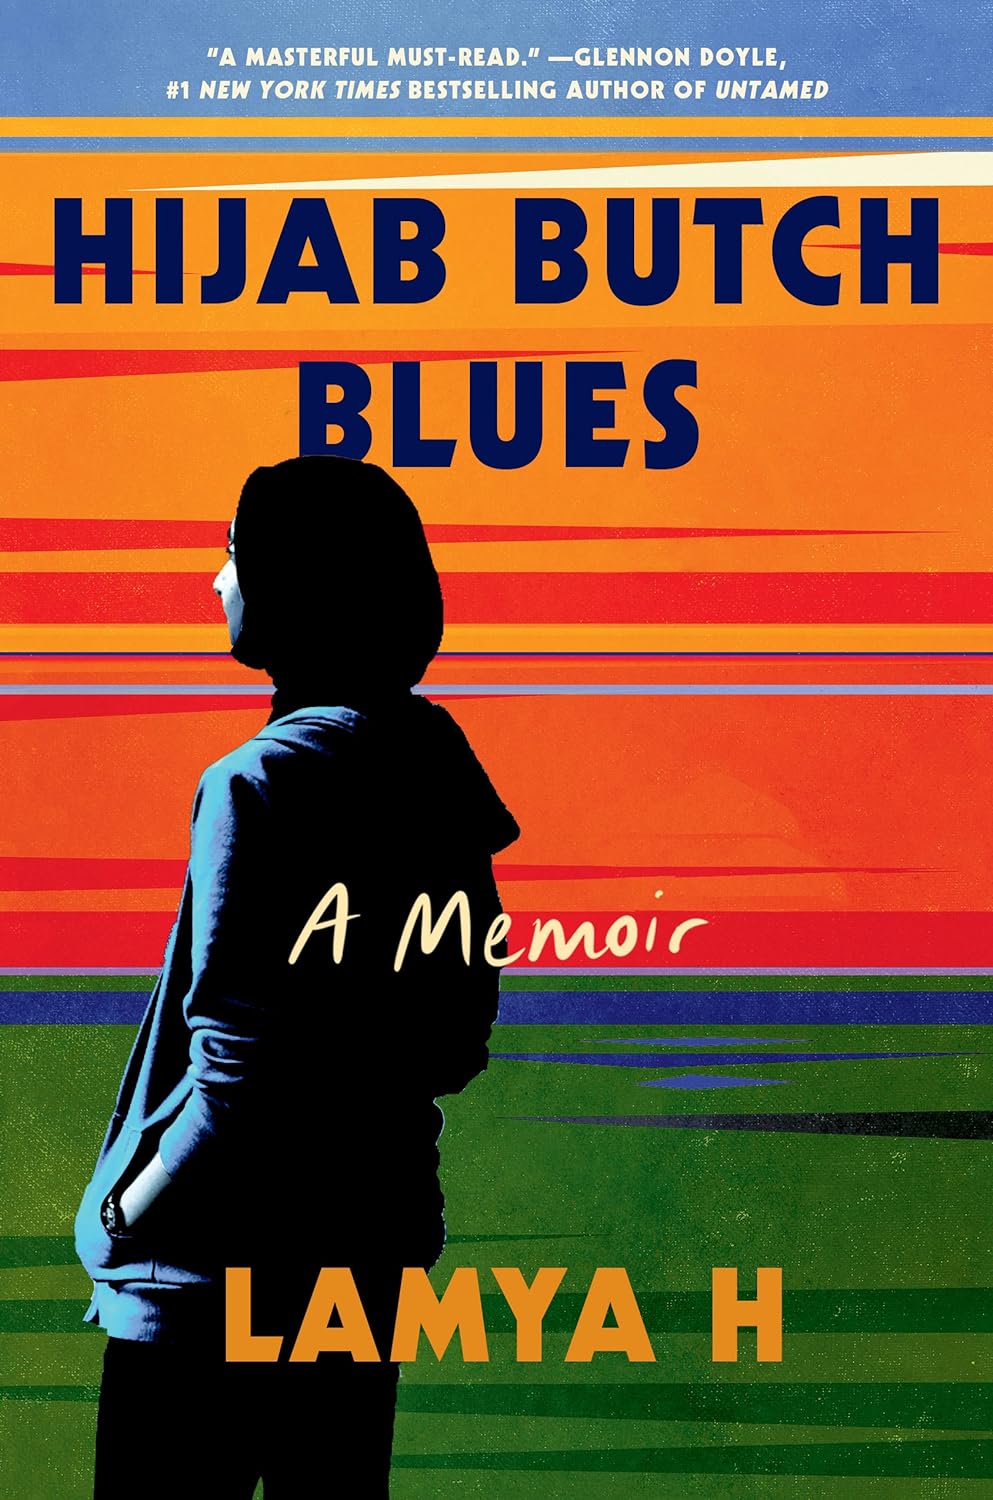 See Hijab Butch Blues in Library Catalog